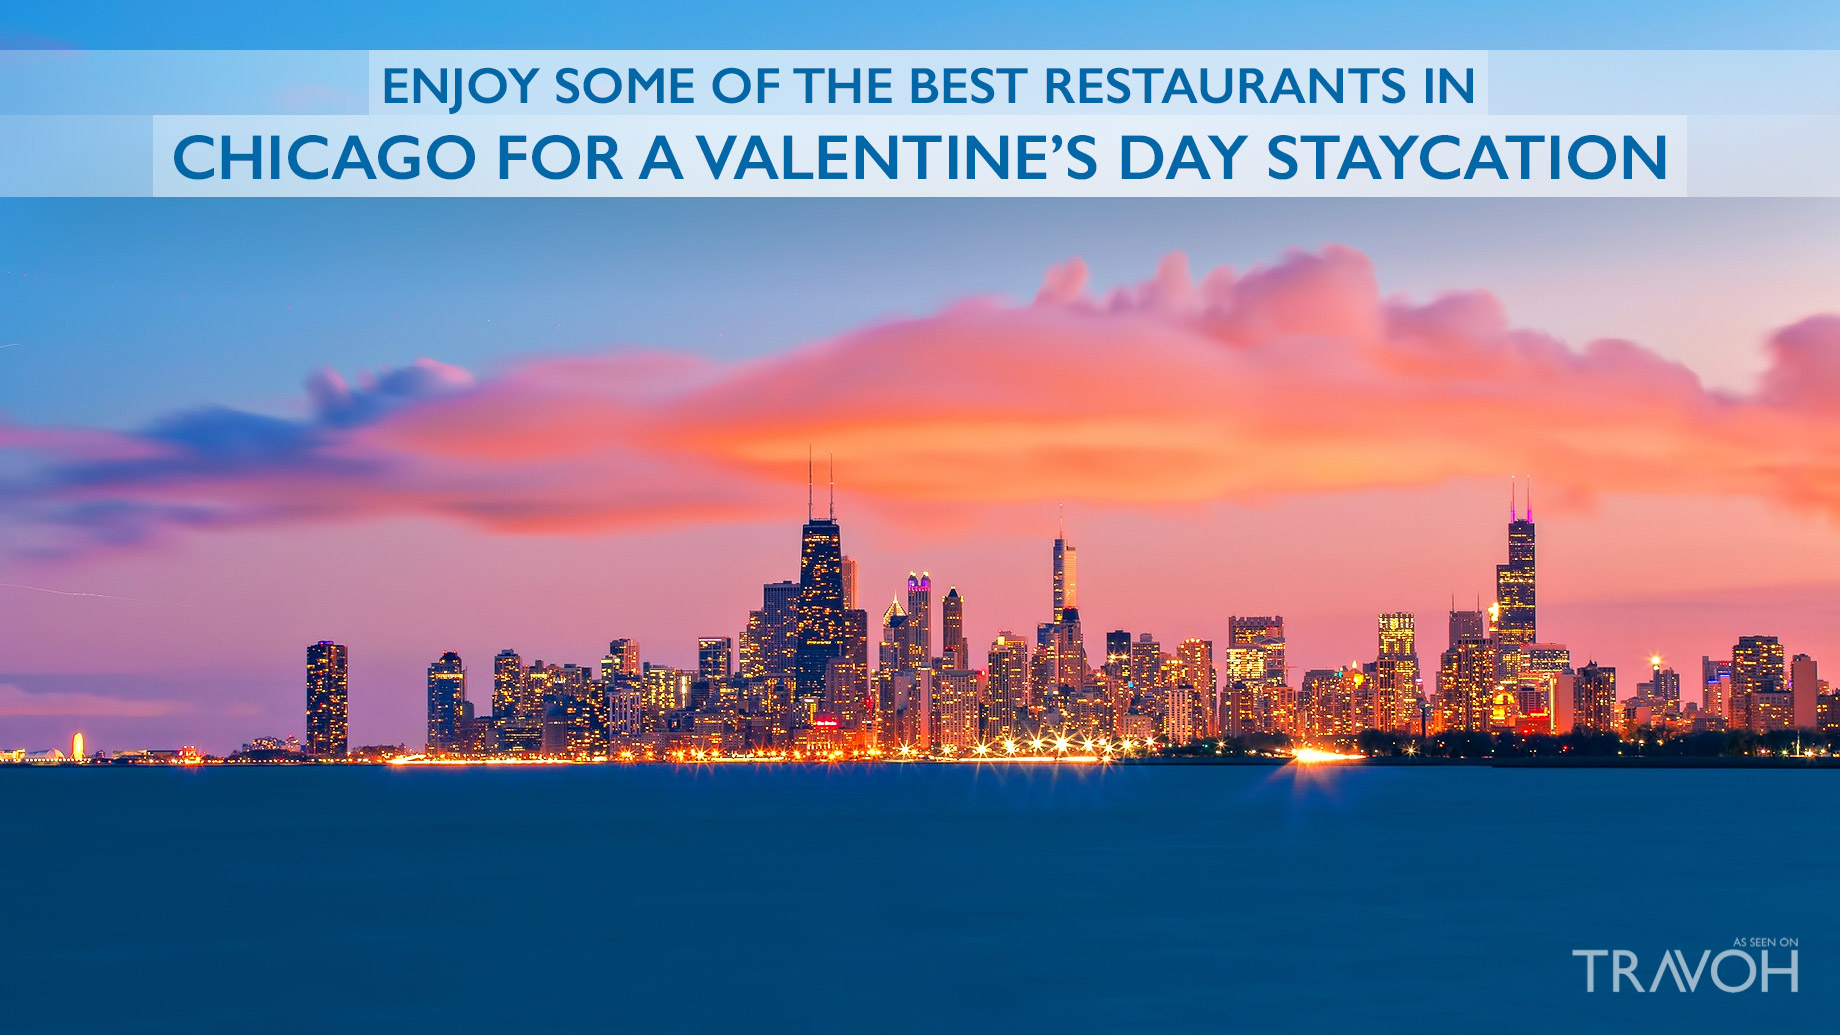 Enjoy Some of the Best Restaurants in Chicago for a Valentine’s Day Staycation